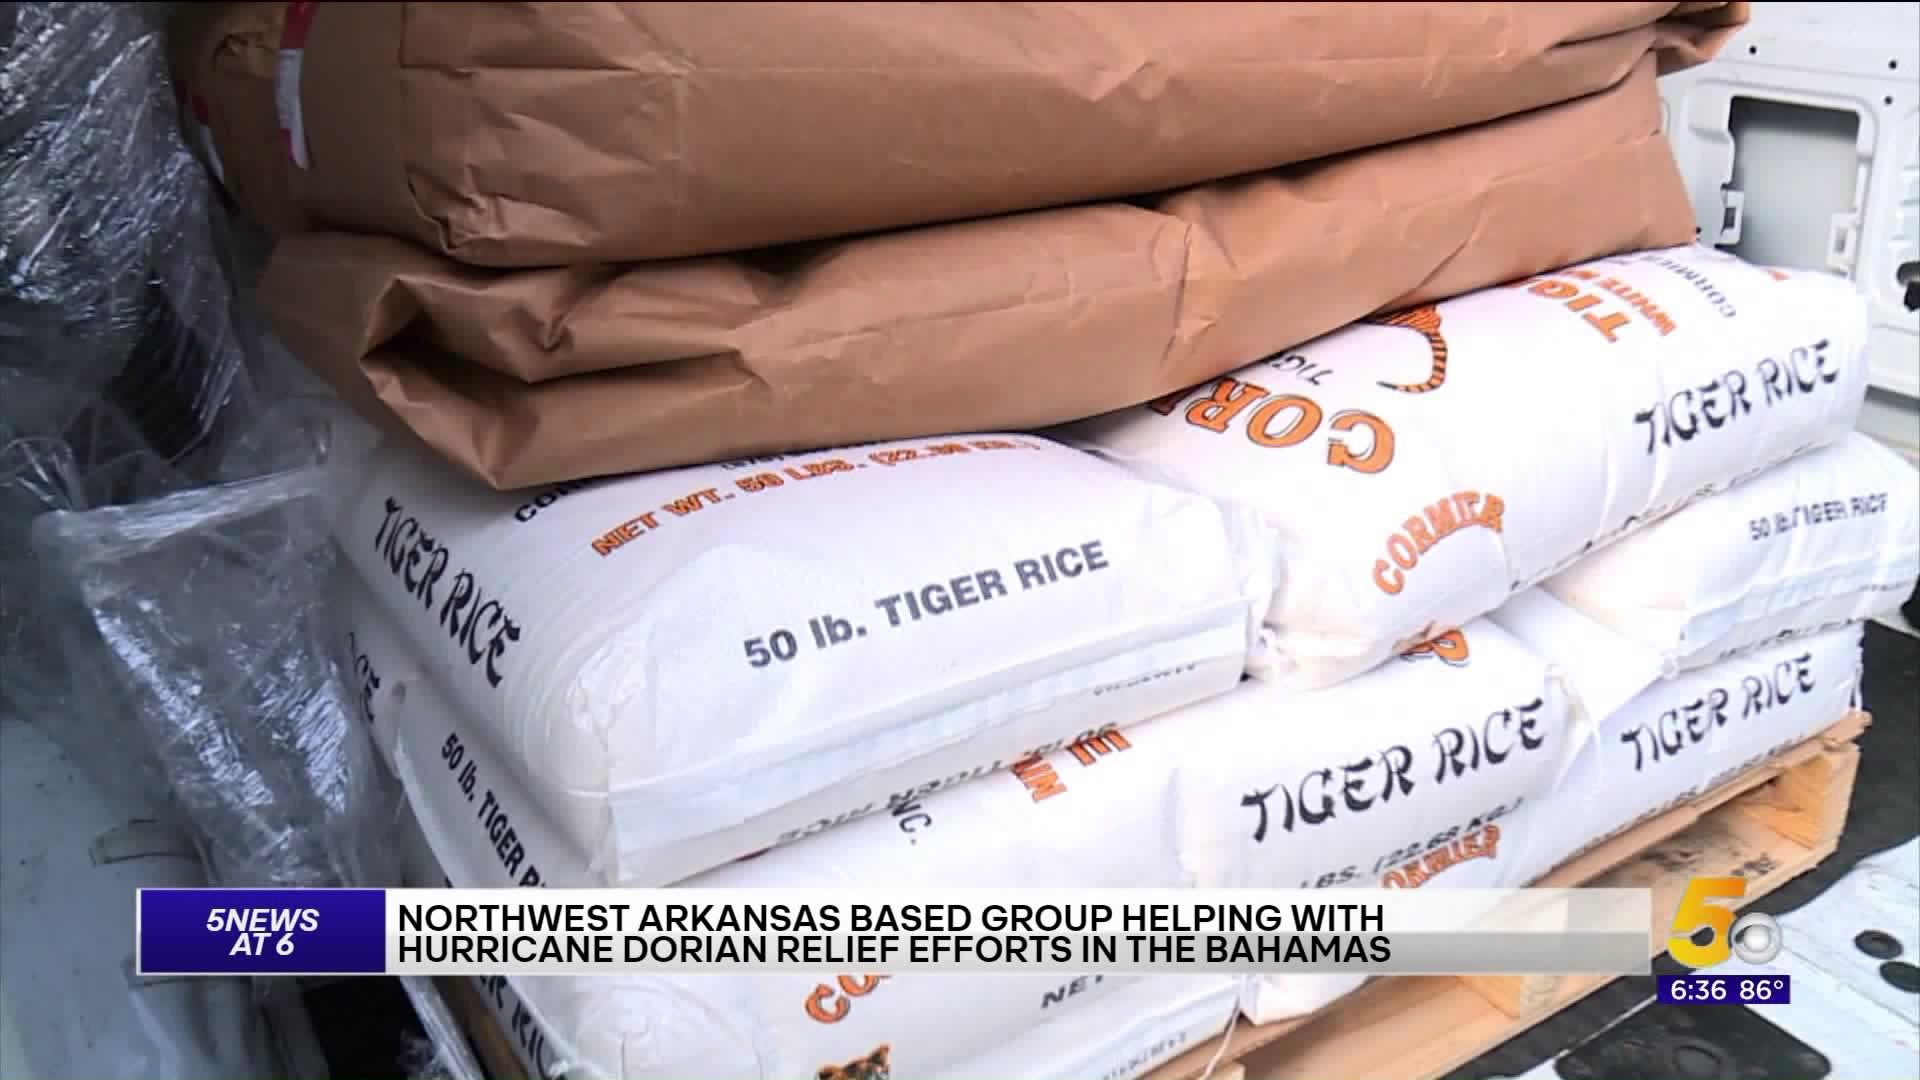 Local Company To Ship 12,000 Meals To The Bahamas For Hurricane Relief